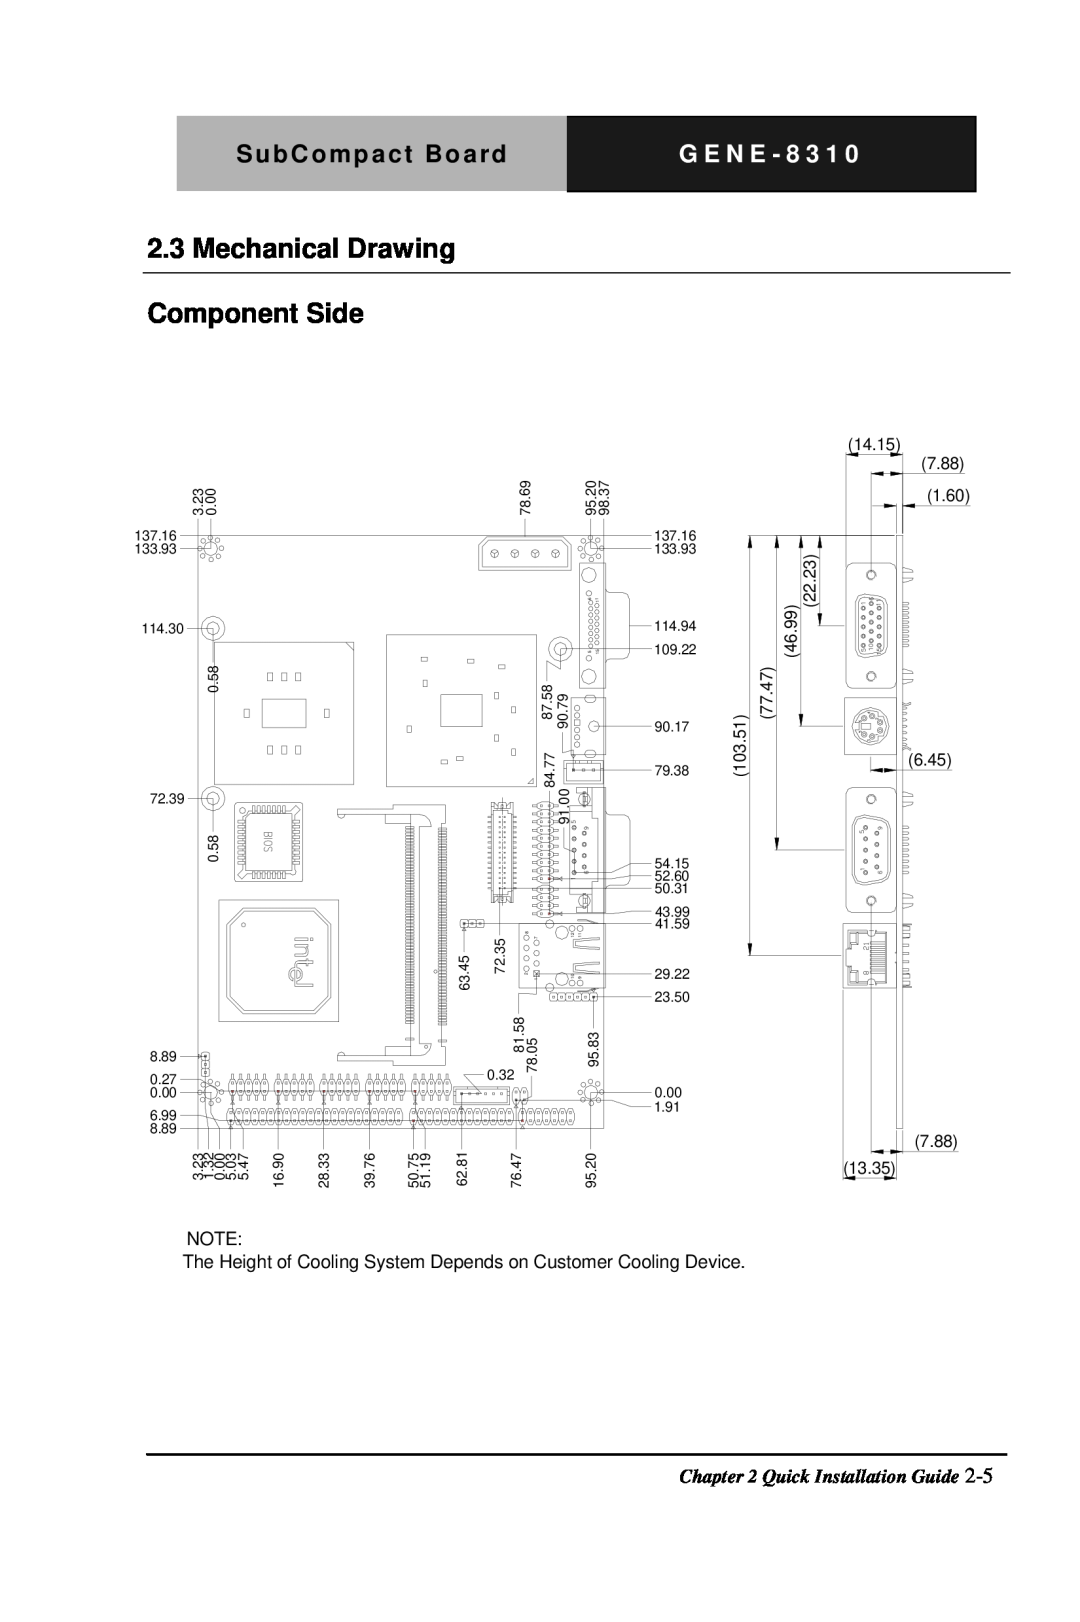 Intel GENE-8310 Mechanical Drawing, Component Side, SubCompact Board, G E N E - 8 3 1, Quick Installation Guide, 103.51 